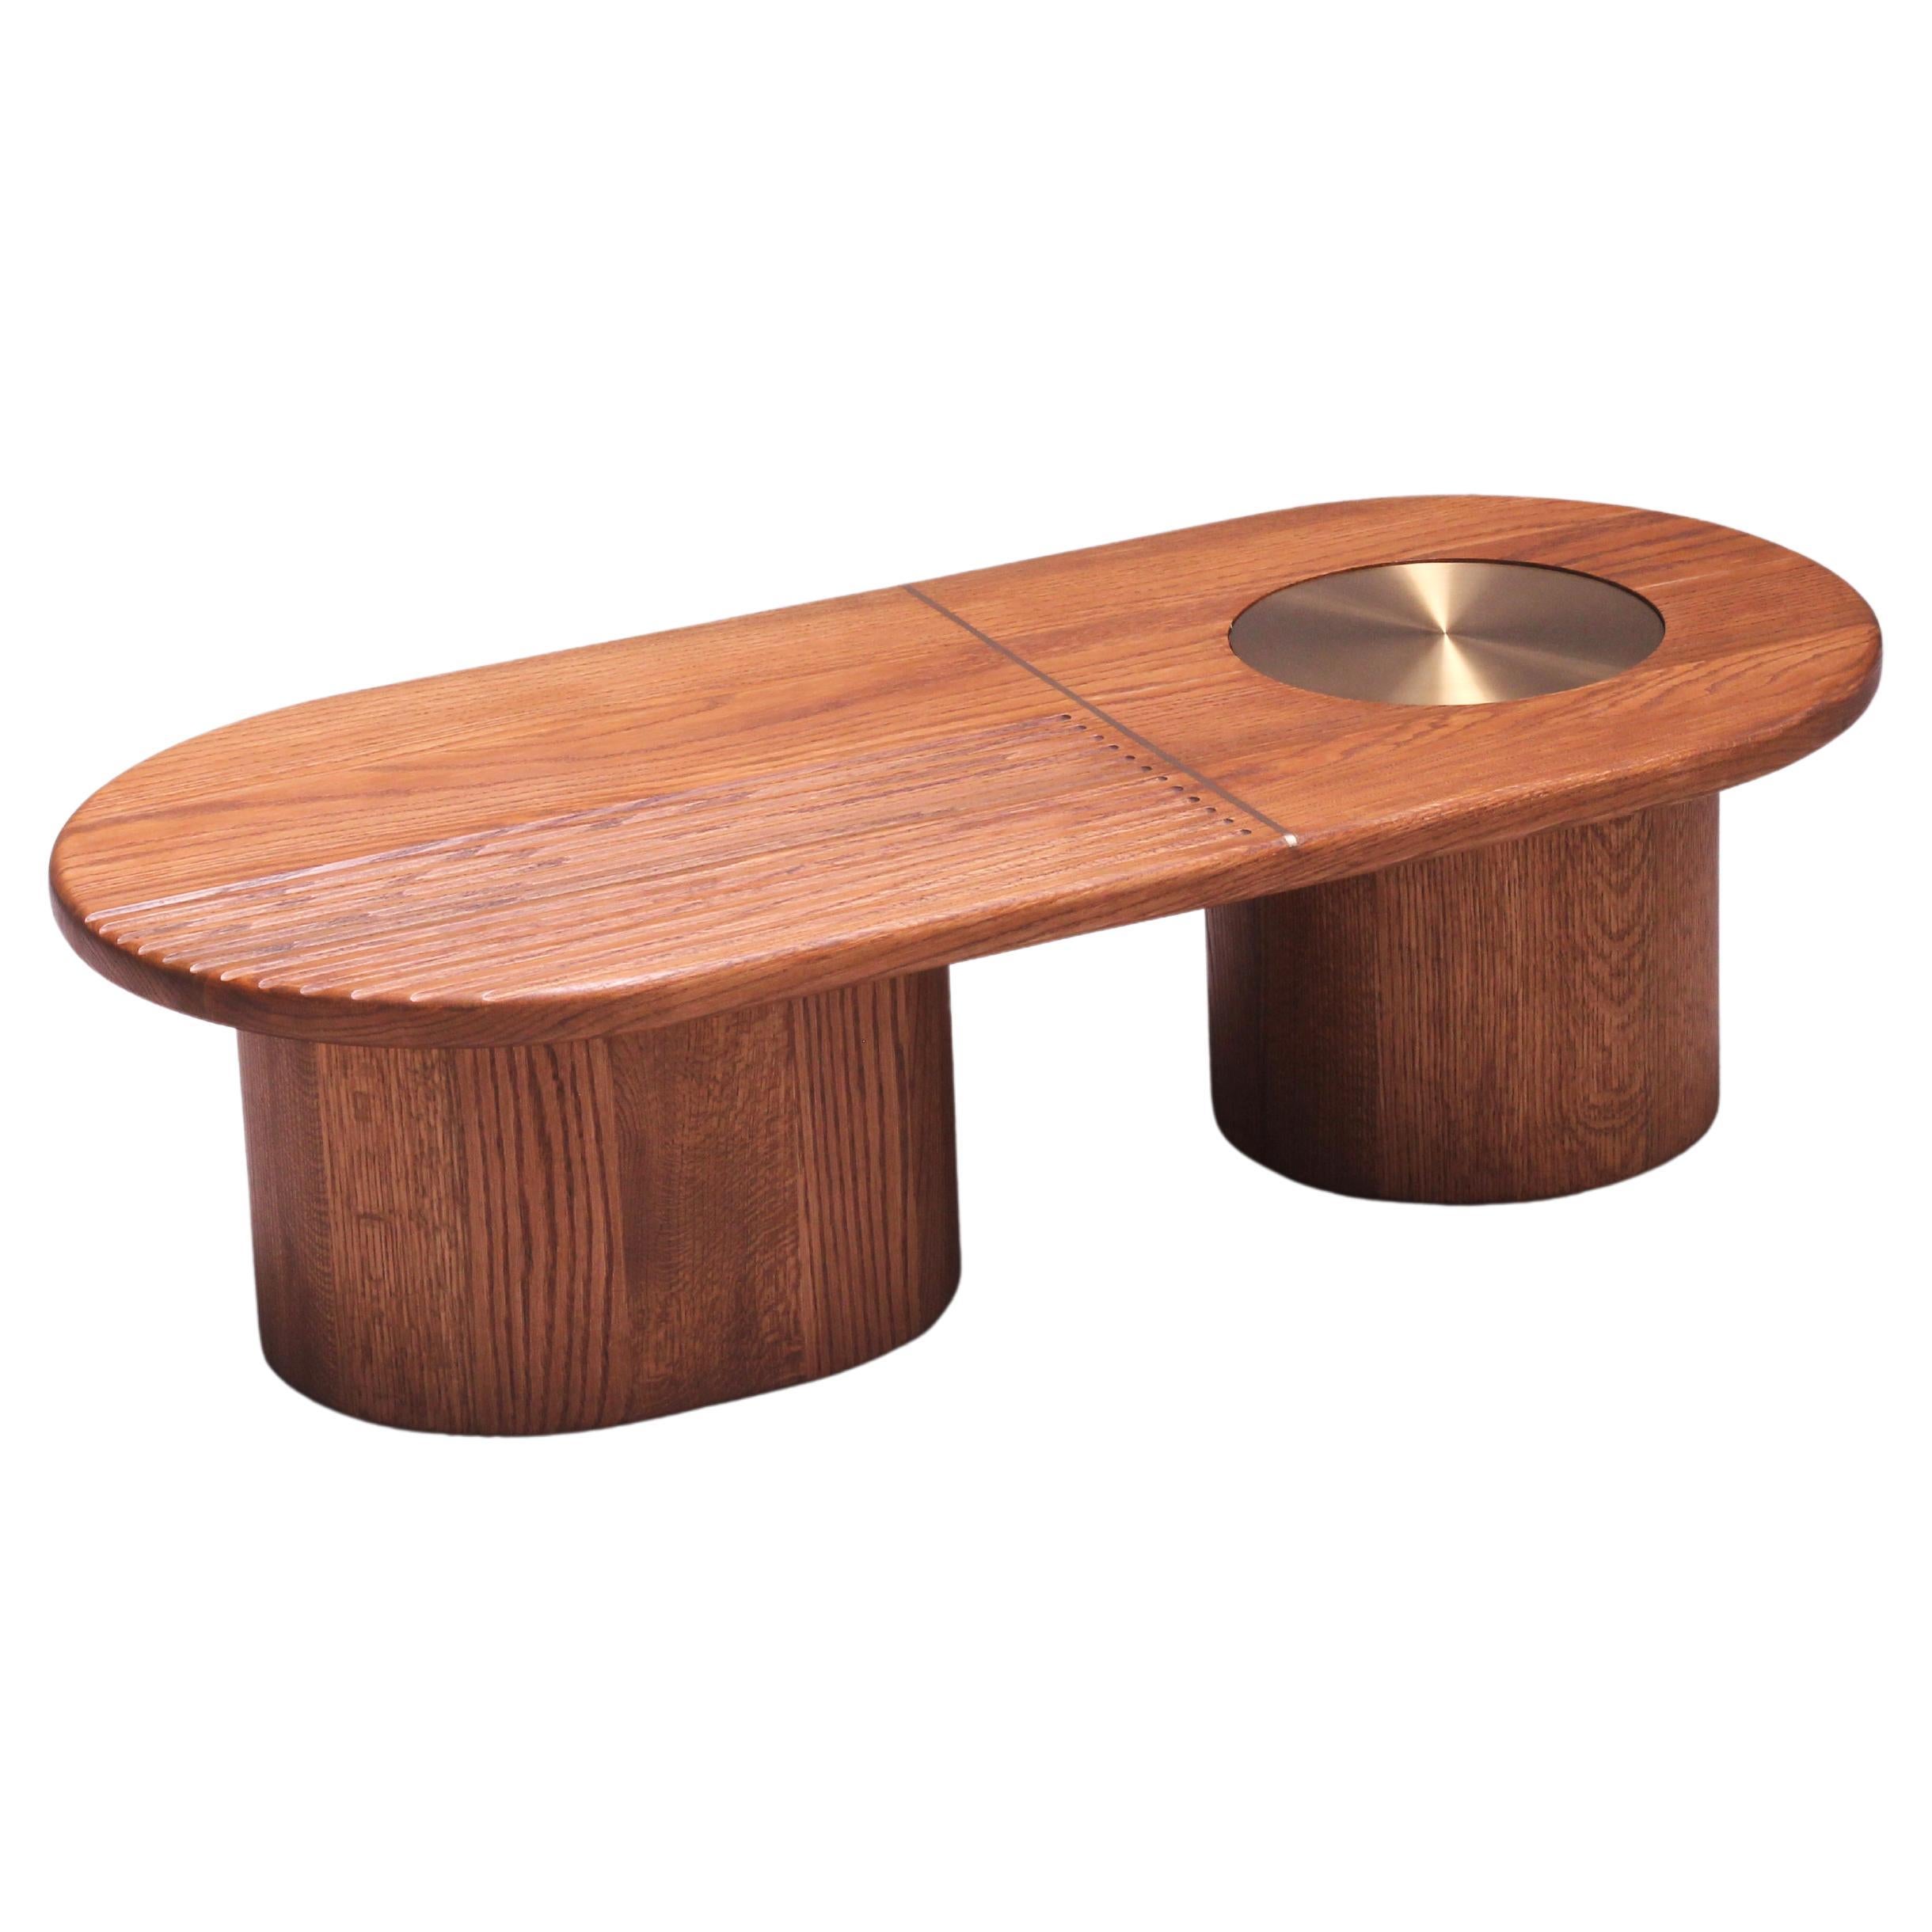 Organic modern crafted American oak solid wood CELESTE coffee table with brass